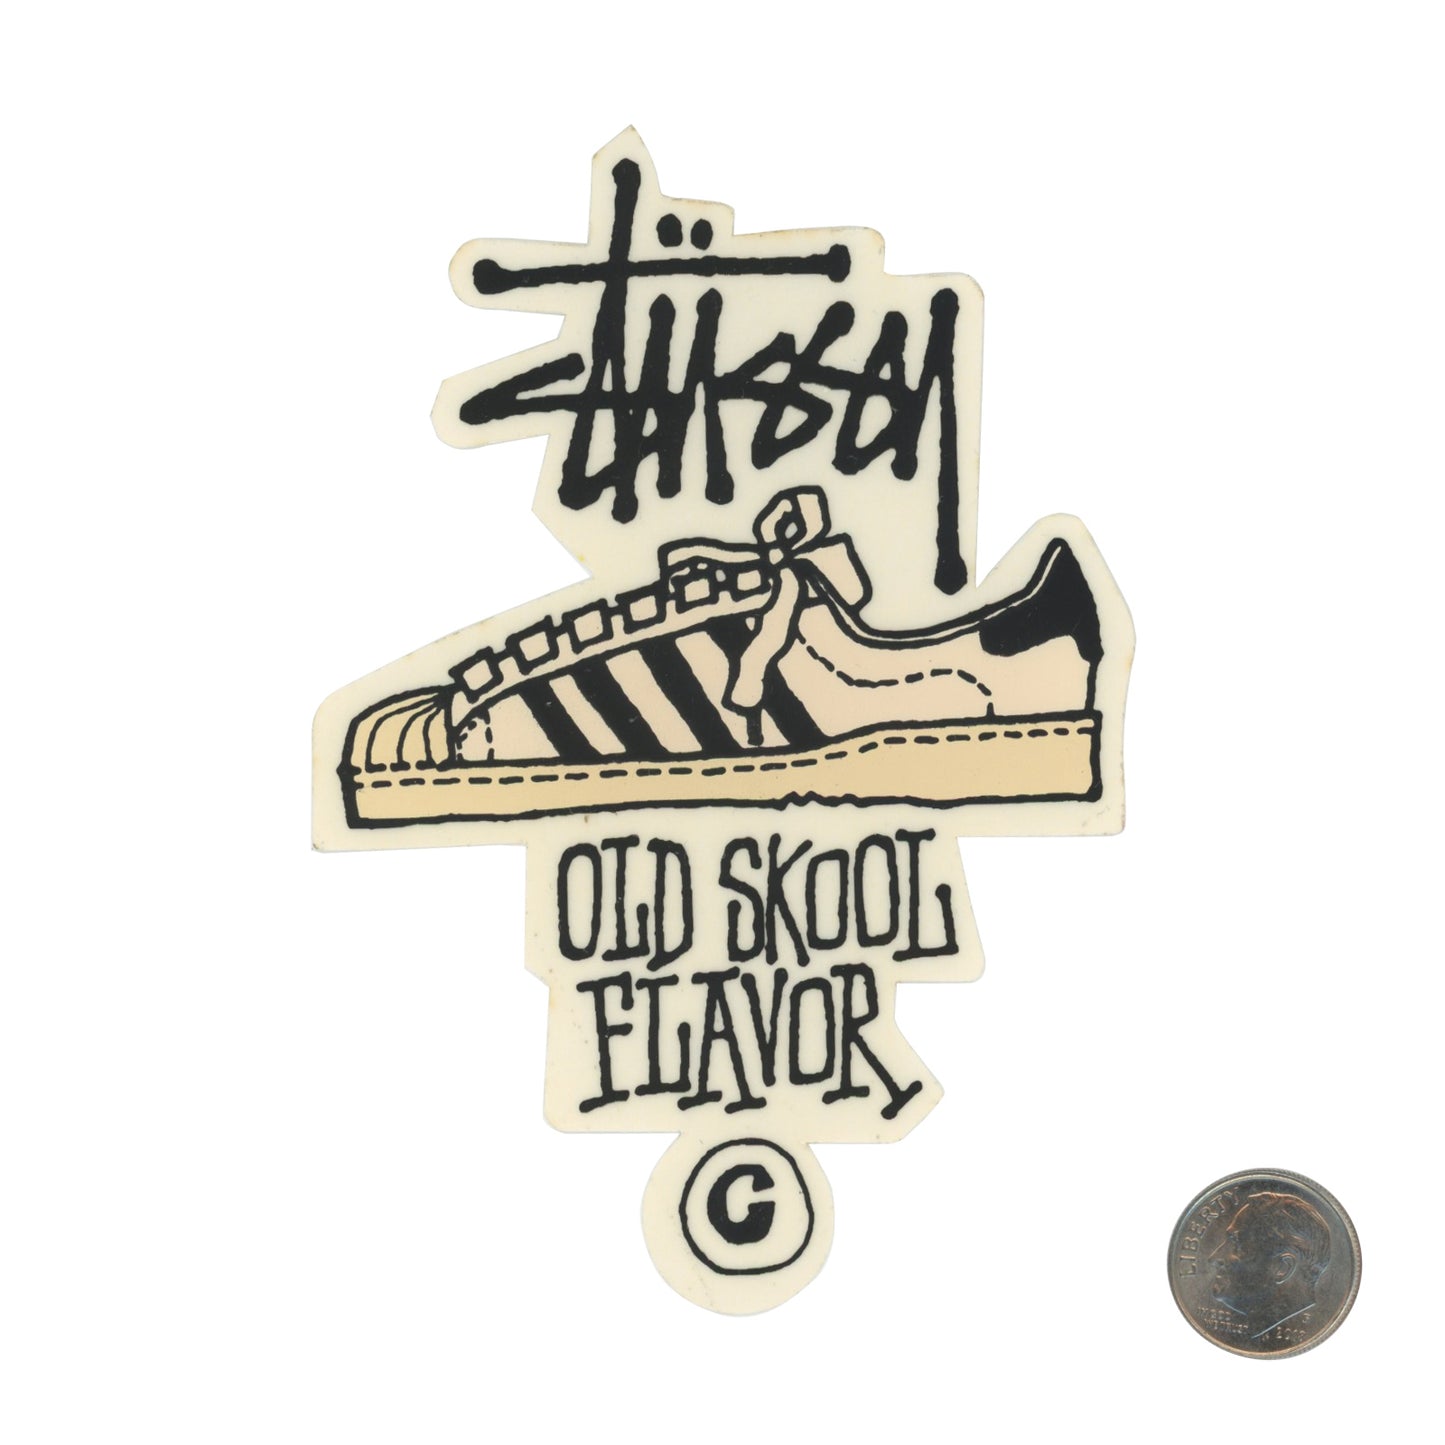 Stussy Old Skool Flavor and Sneaker Graphic Sticker